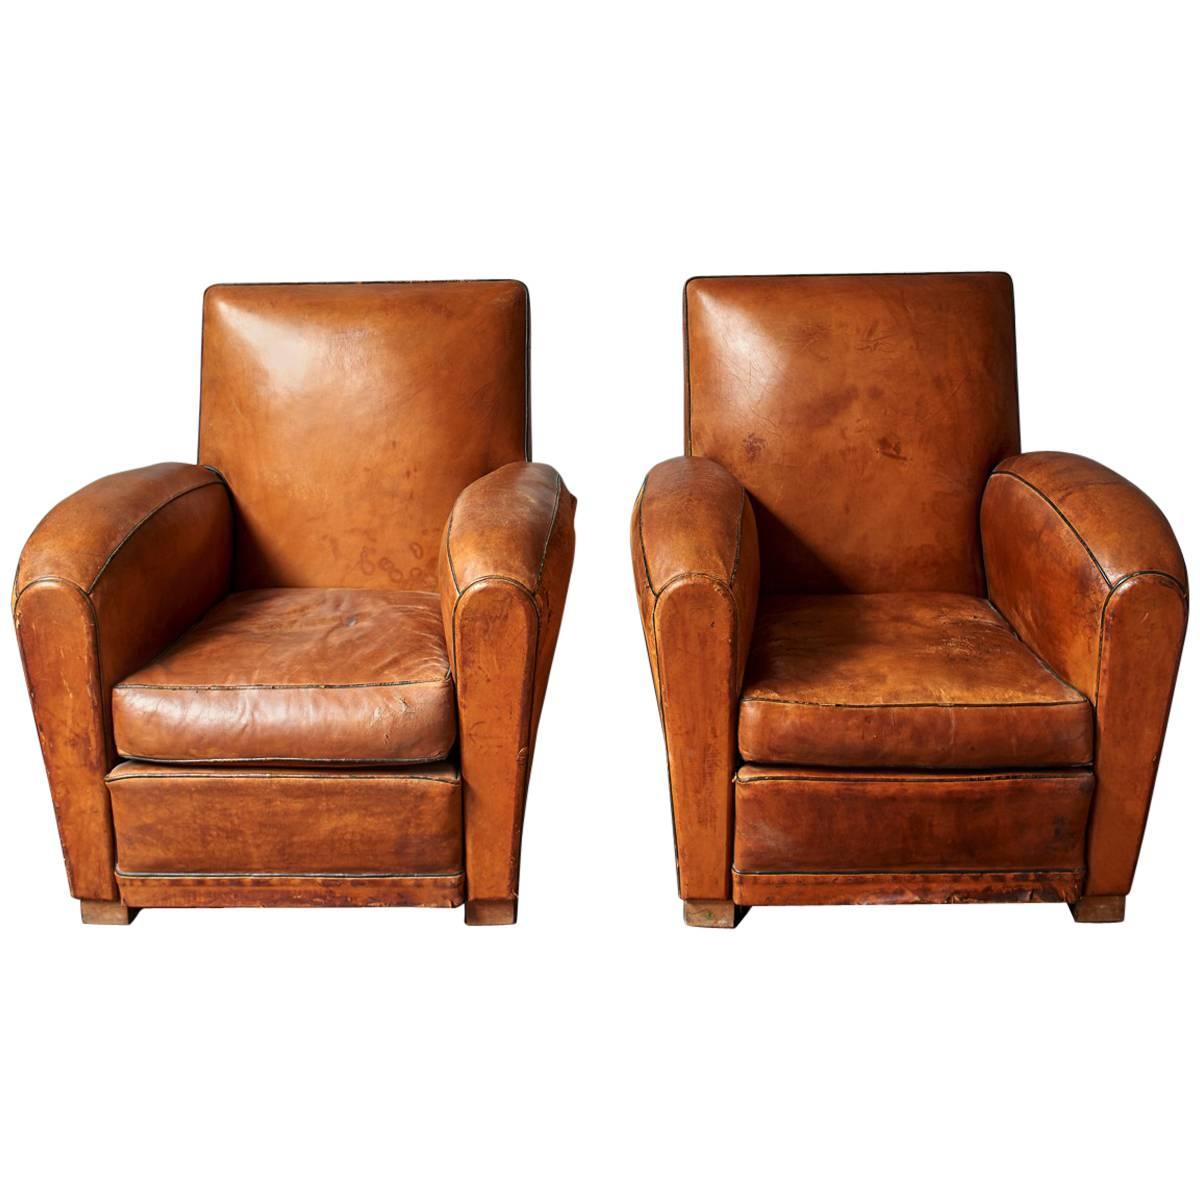 Pair of 1930s Leather Club Chairs